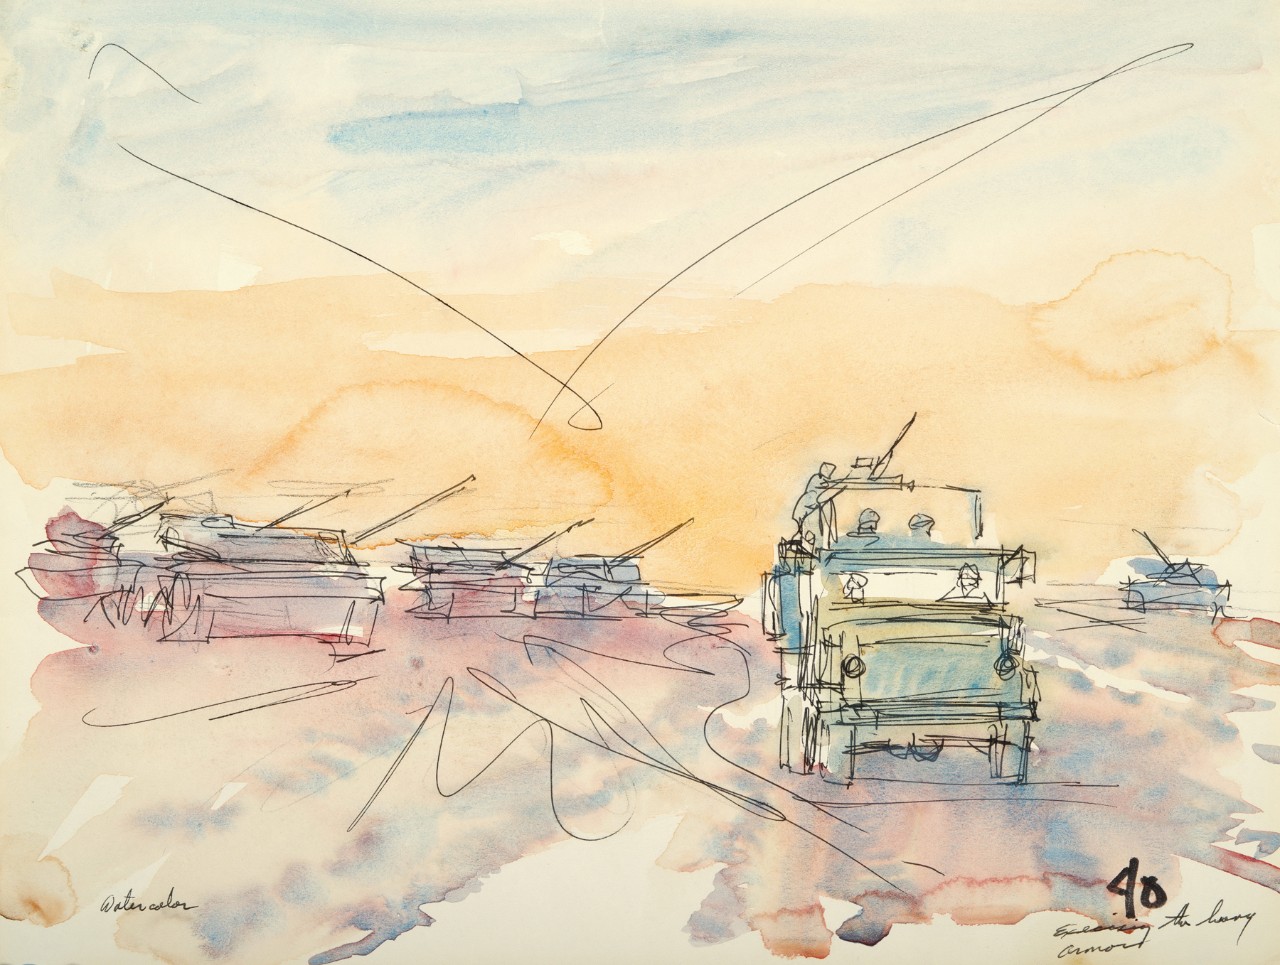 Four tanks are in the background as a small Humvee drives in front of them with the sun setting in background